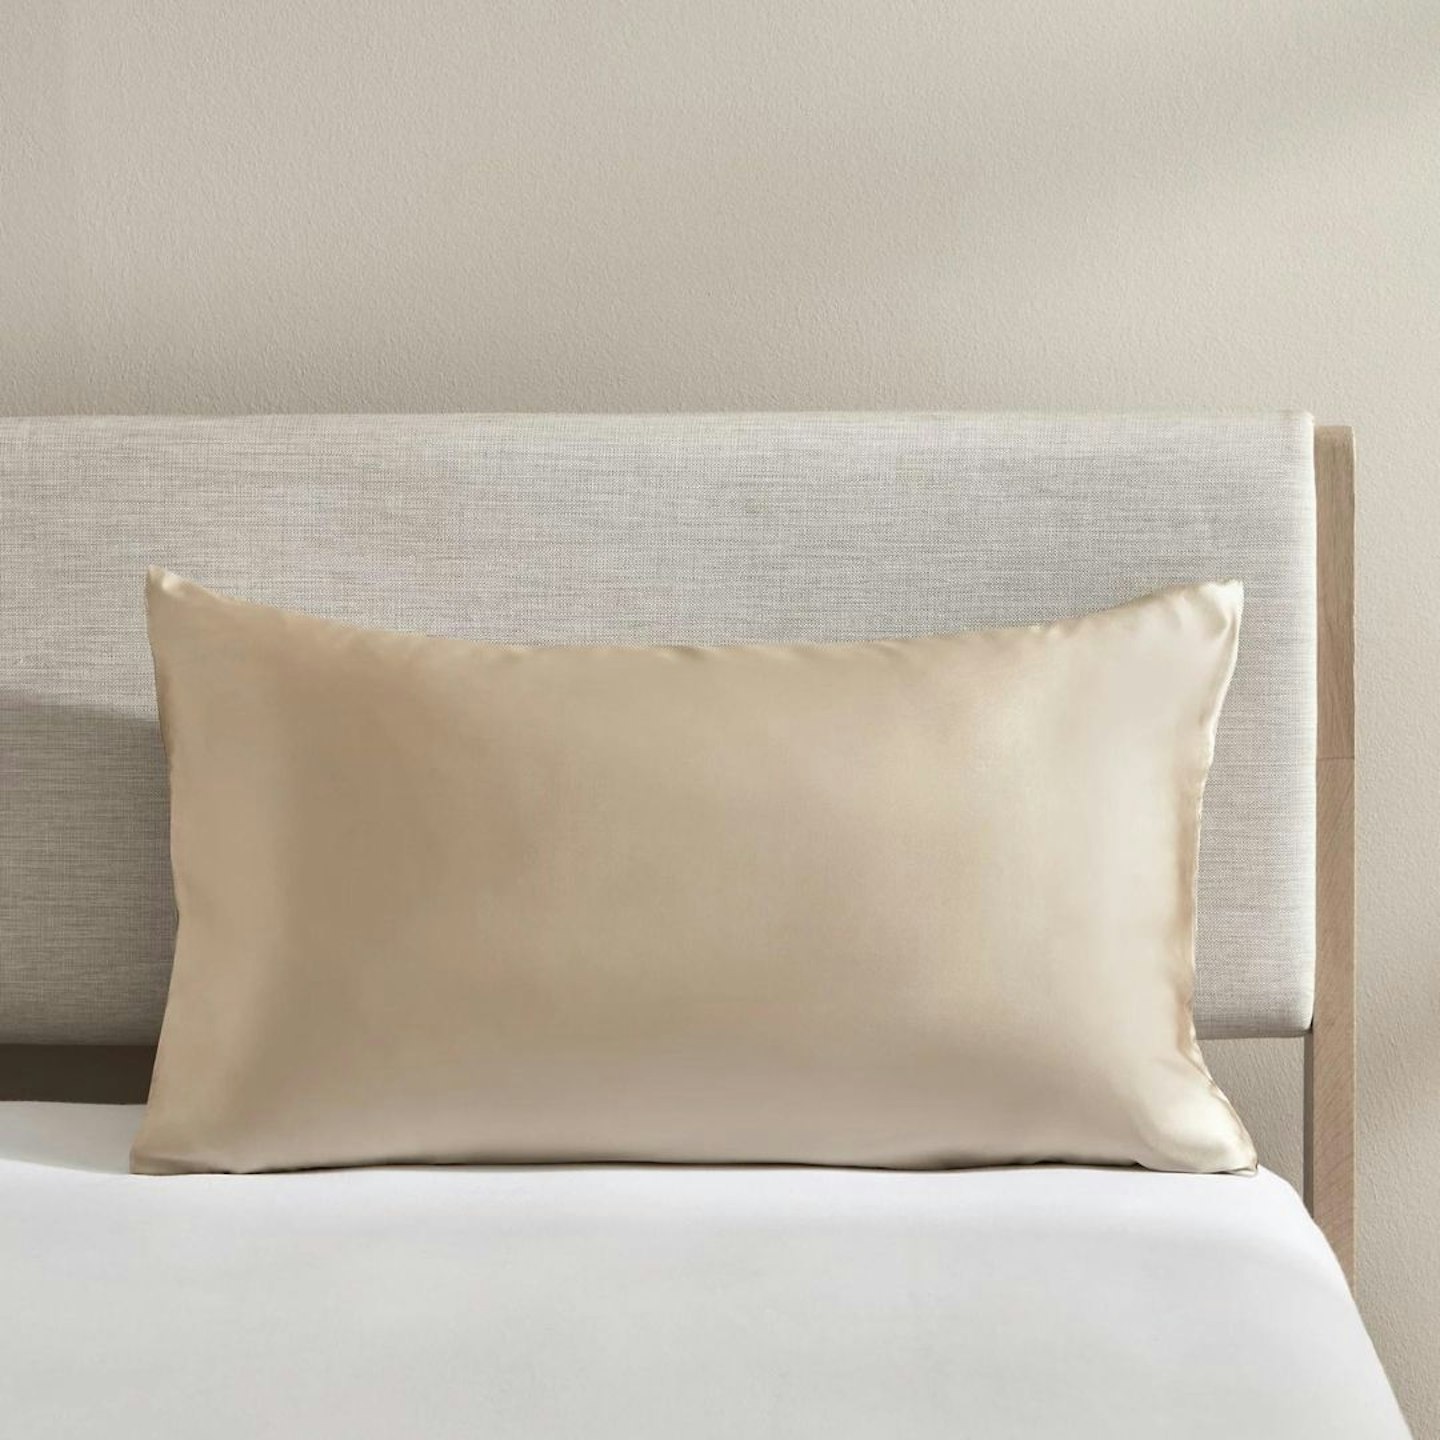 Marks and Spencer's Pure Silk Pillowcase